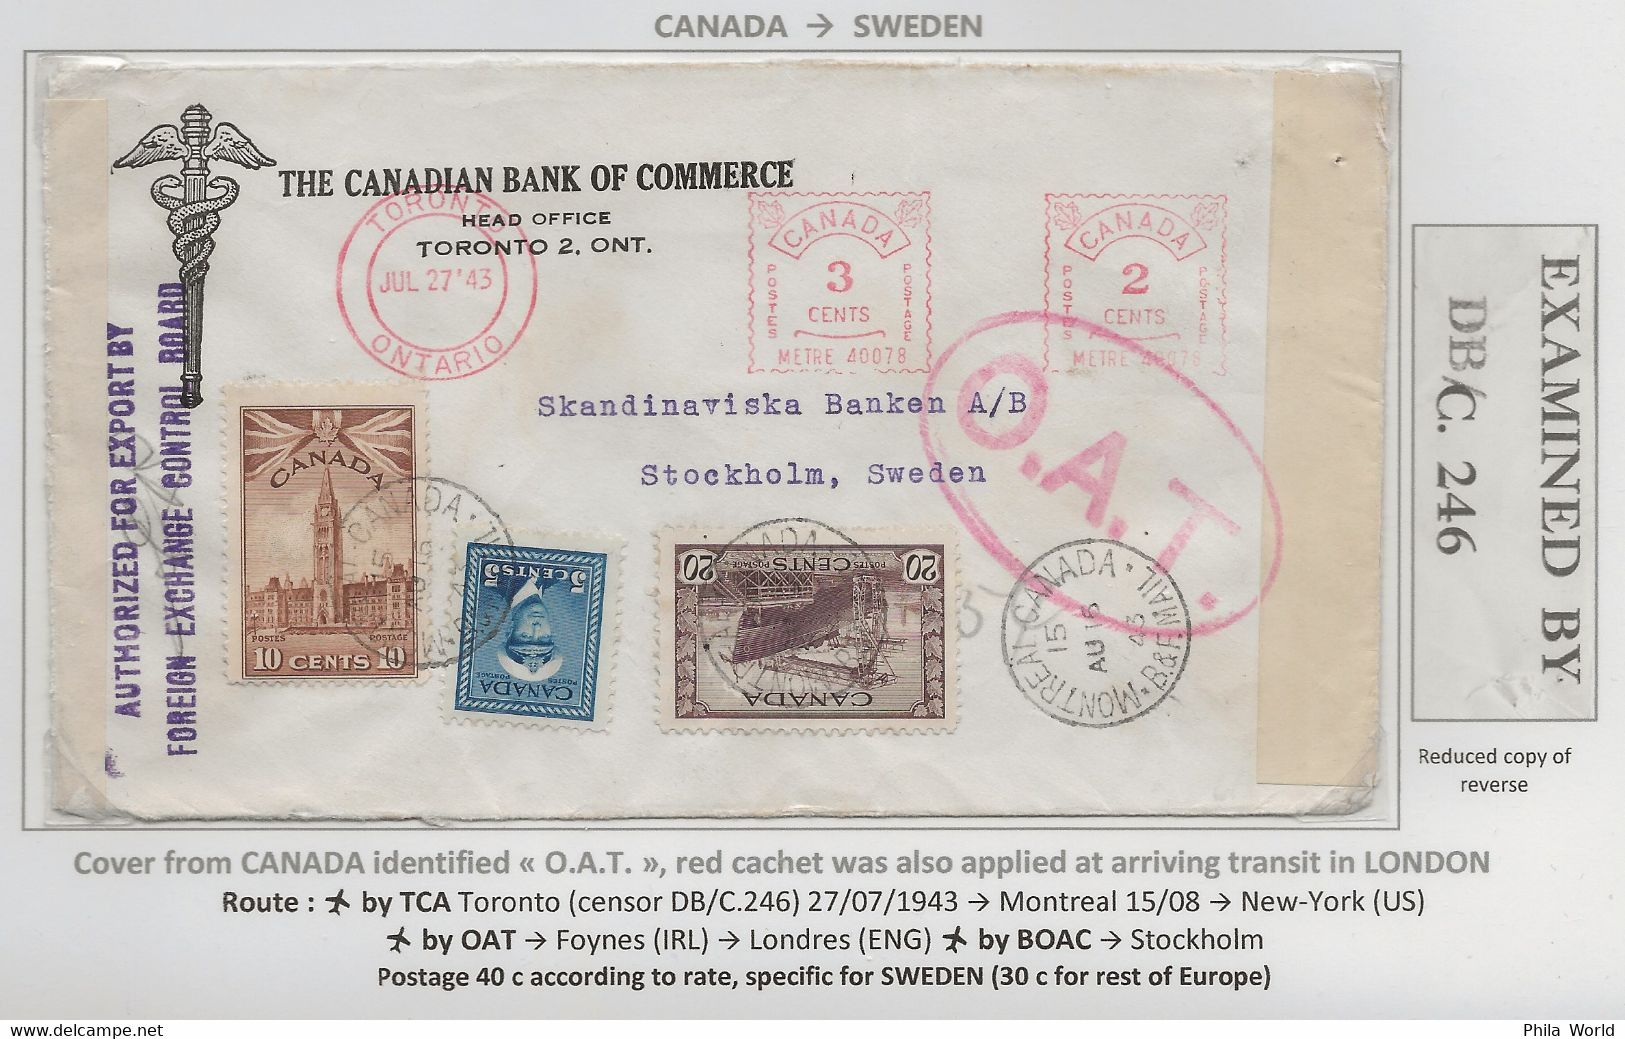 OAT 1943 CANADA Meter Postage EMA Air Mail Cover > SWEDEN US Censor EXAMINED DB/C 246 Censortape From TORONTO - Brieven En Documenten